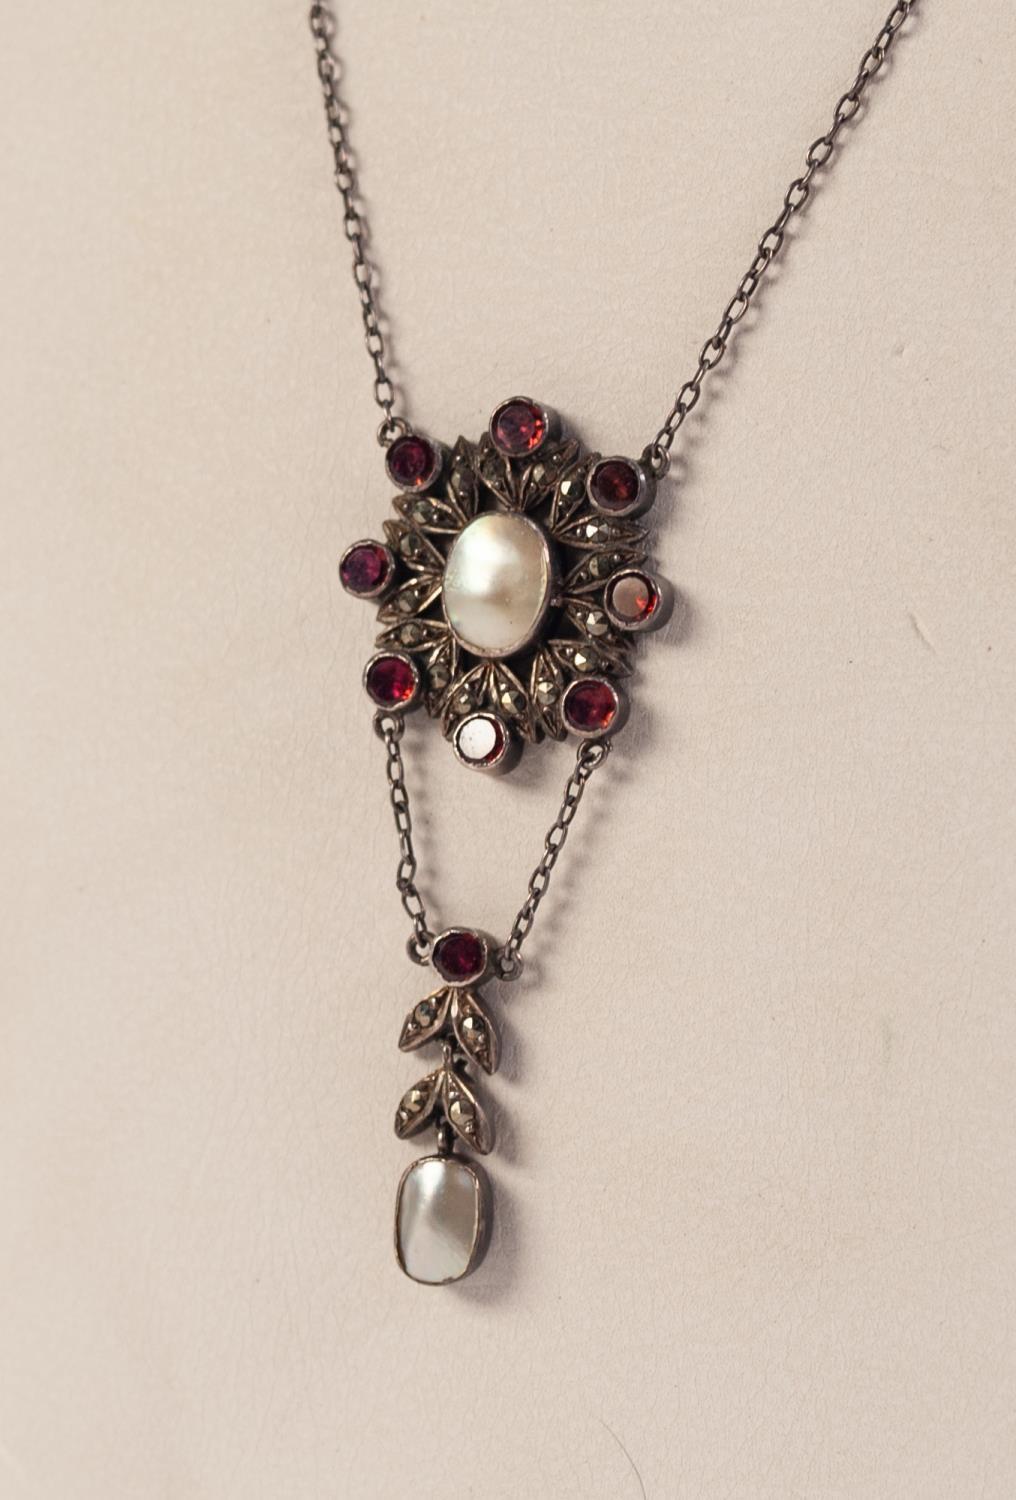 SILVER COLOURED METAL FINE CHAIN NECKLACE THE PENDANT FRONT SET WITH OVAL MOTHER OF PEARL in a - Image 2 of 2